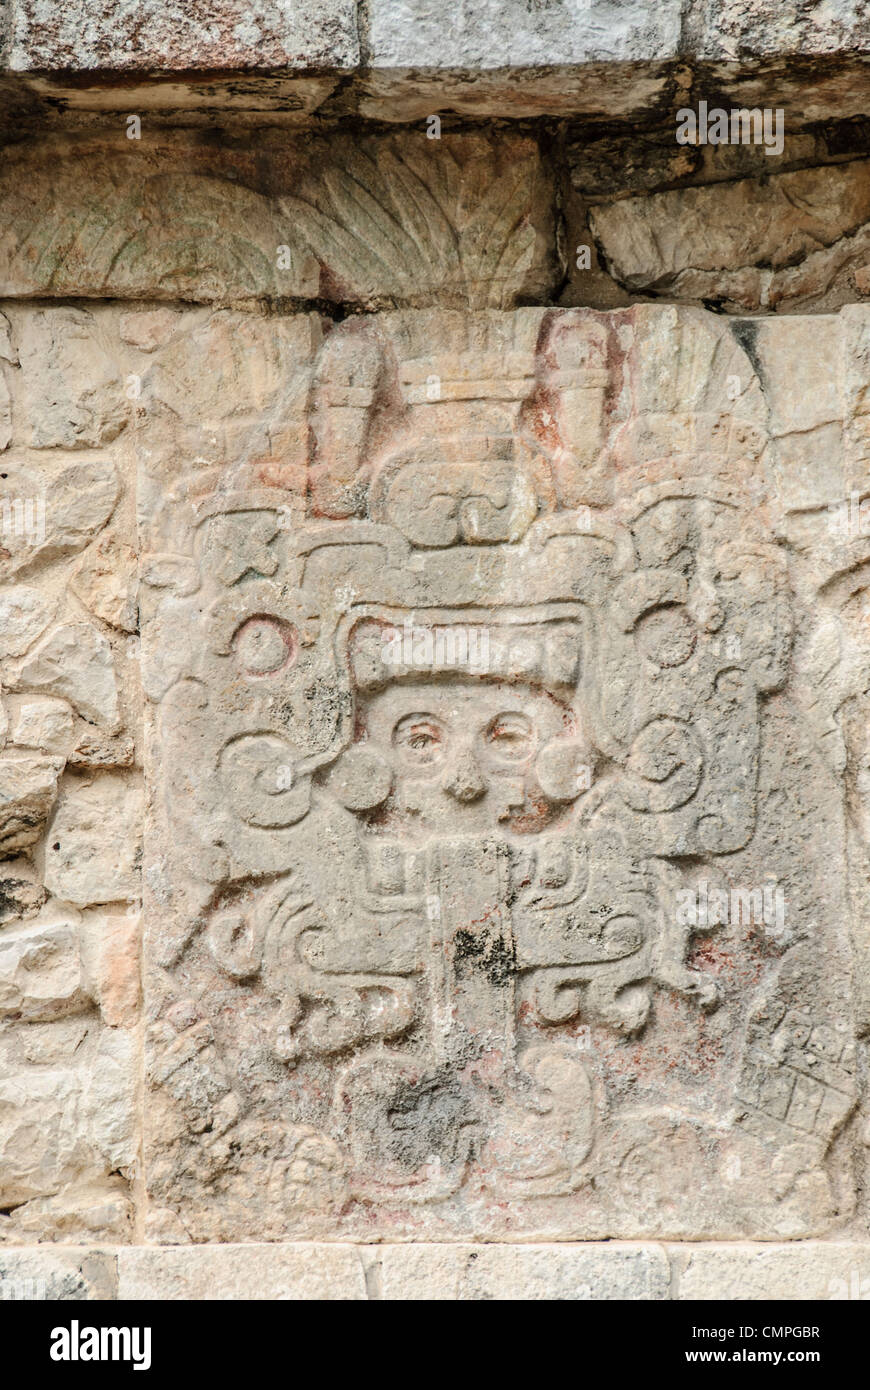 CHICHEN ITZA, Mexico - Carving of a Mayan warrior at Chichen Itza Archeological Zone, Mexico Stock Photo